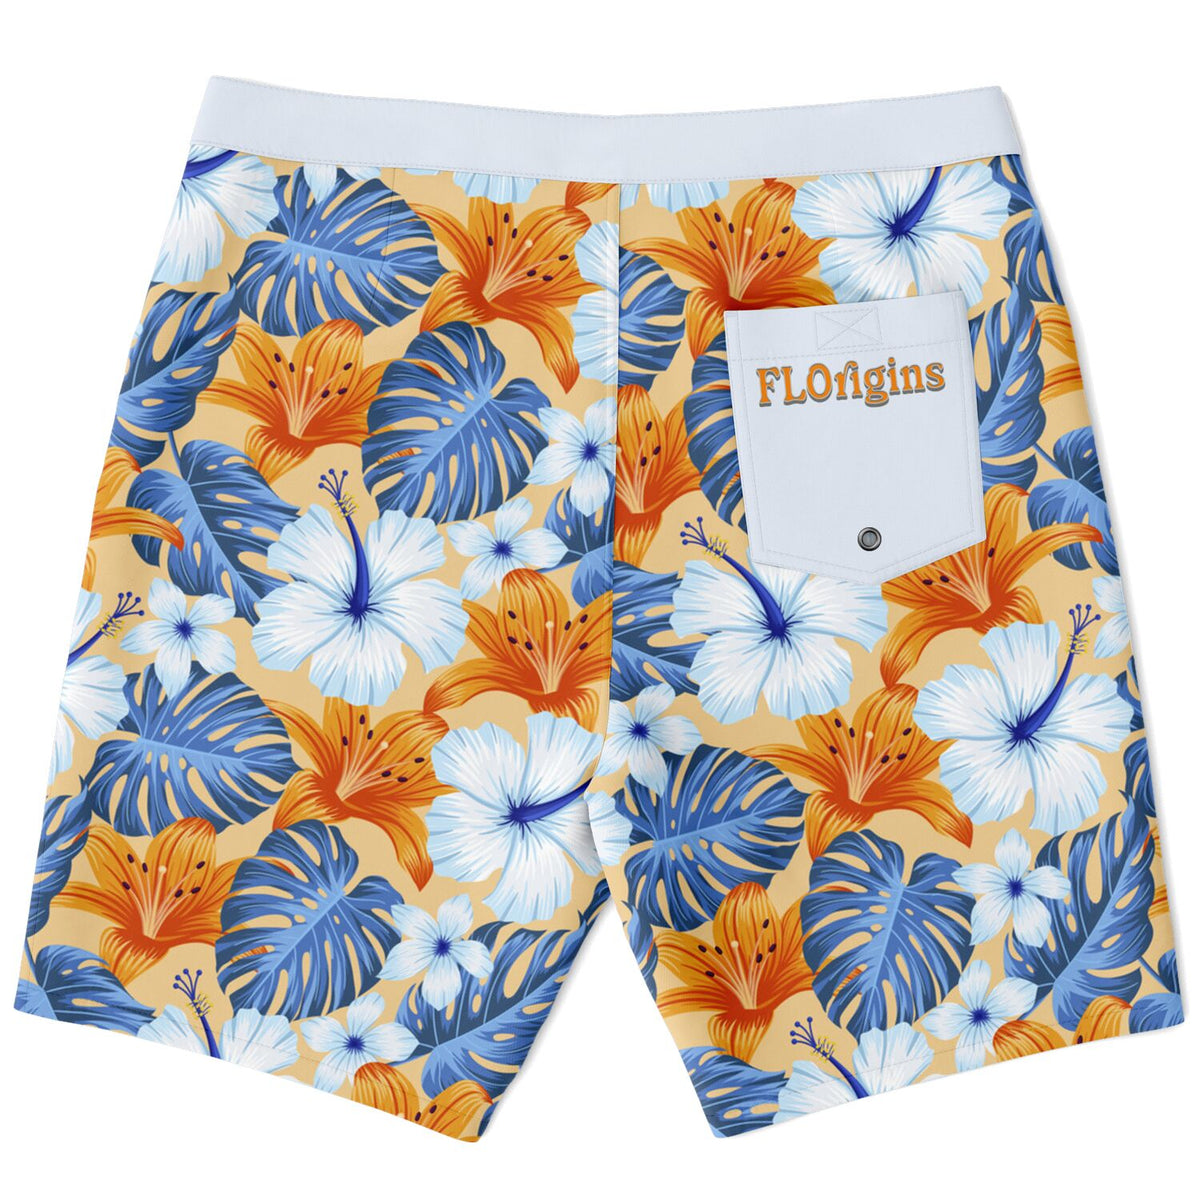 FLOBiscus Board Shorts